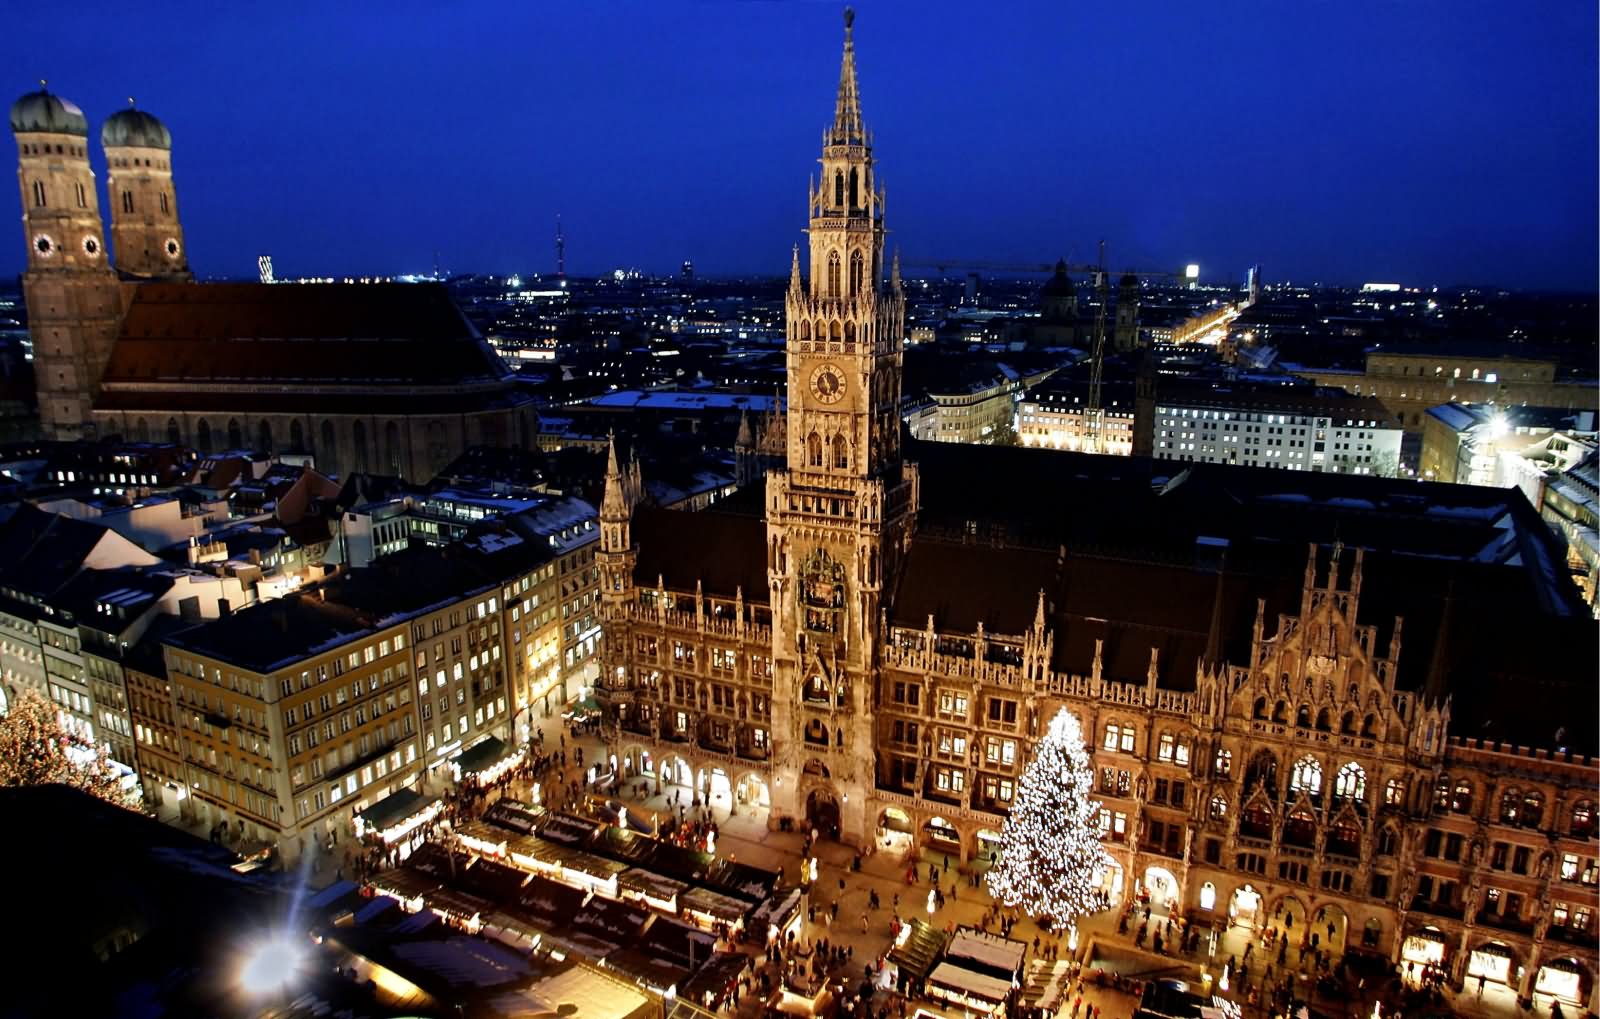 Adorable Aerial View Of The Neues Rathaus And Marienplatz At Night